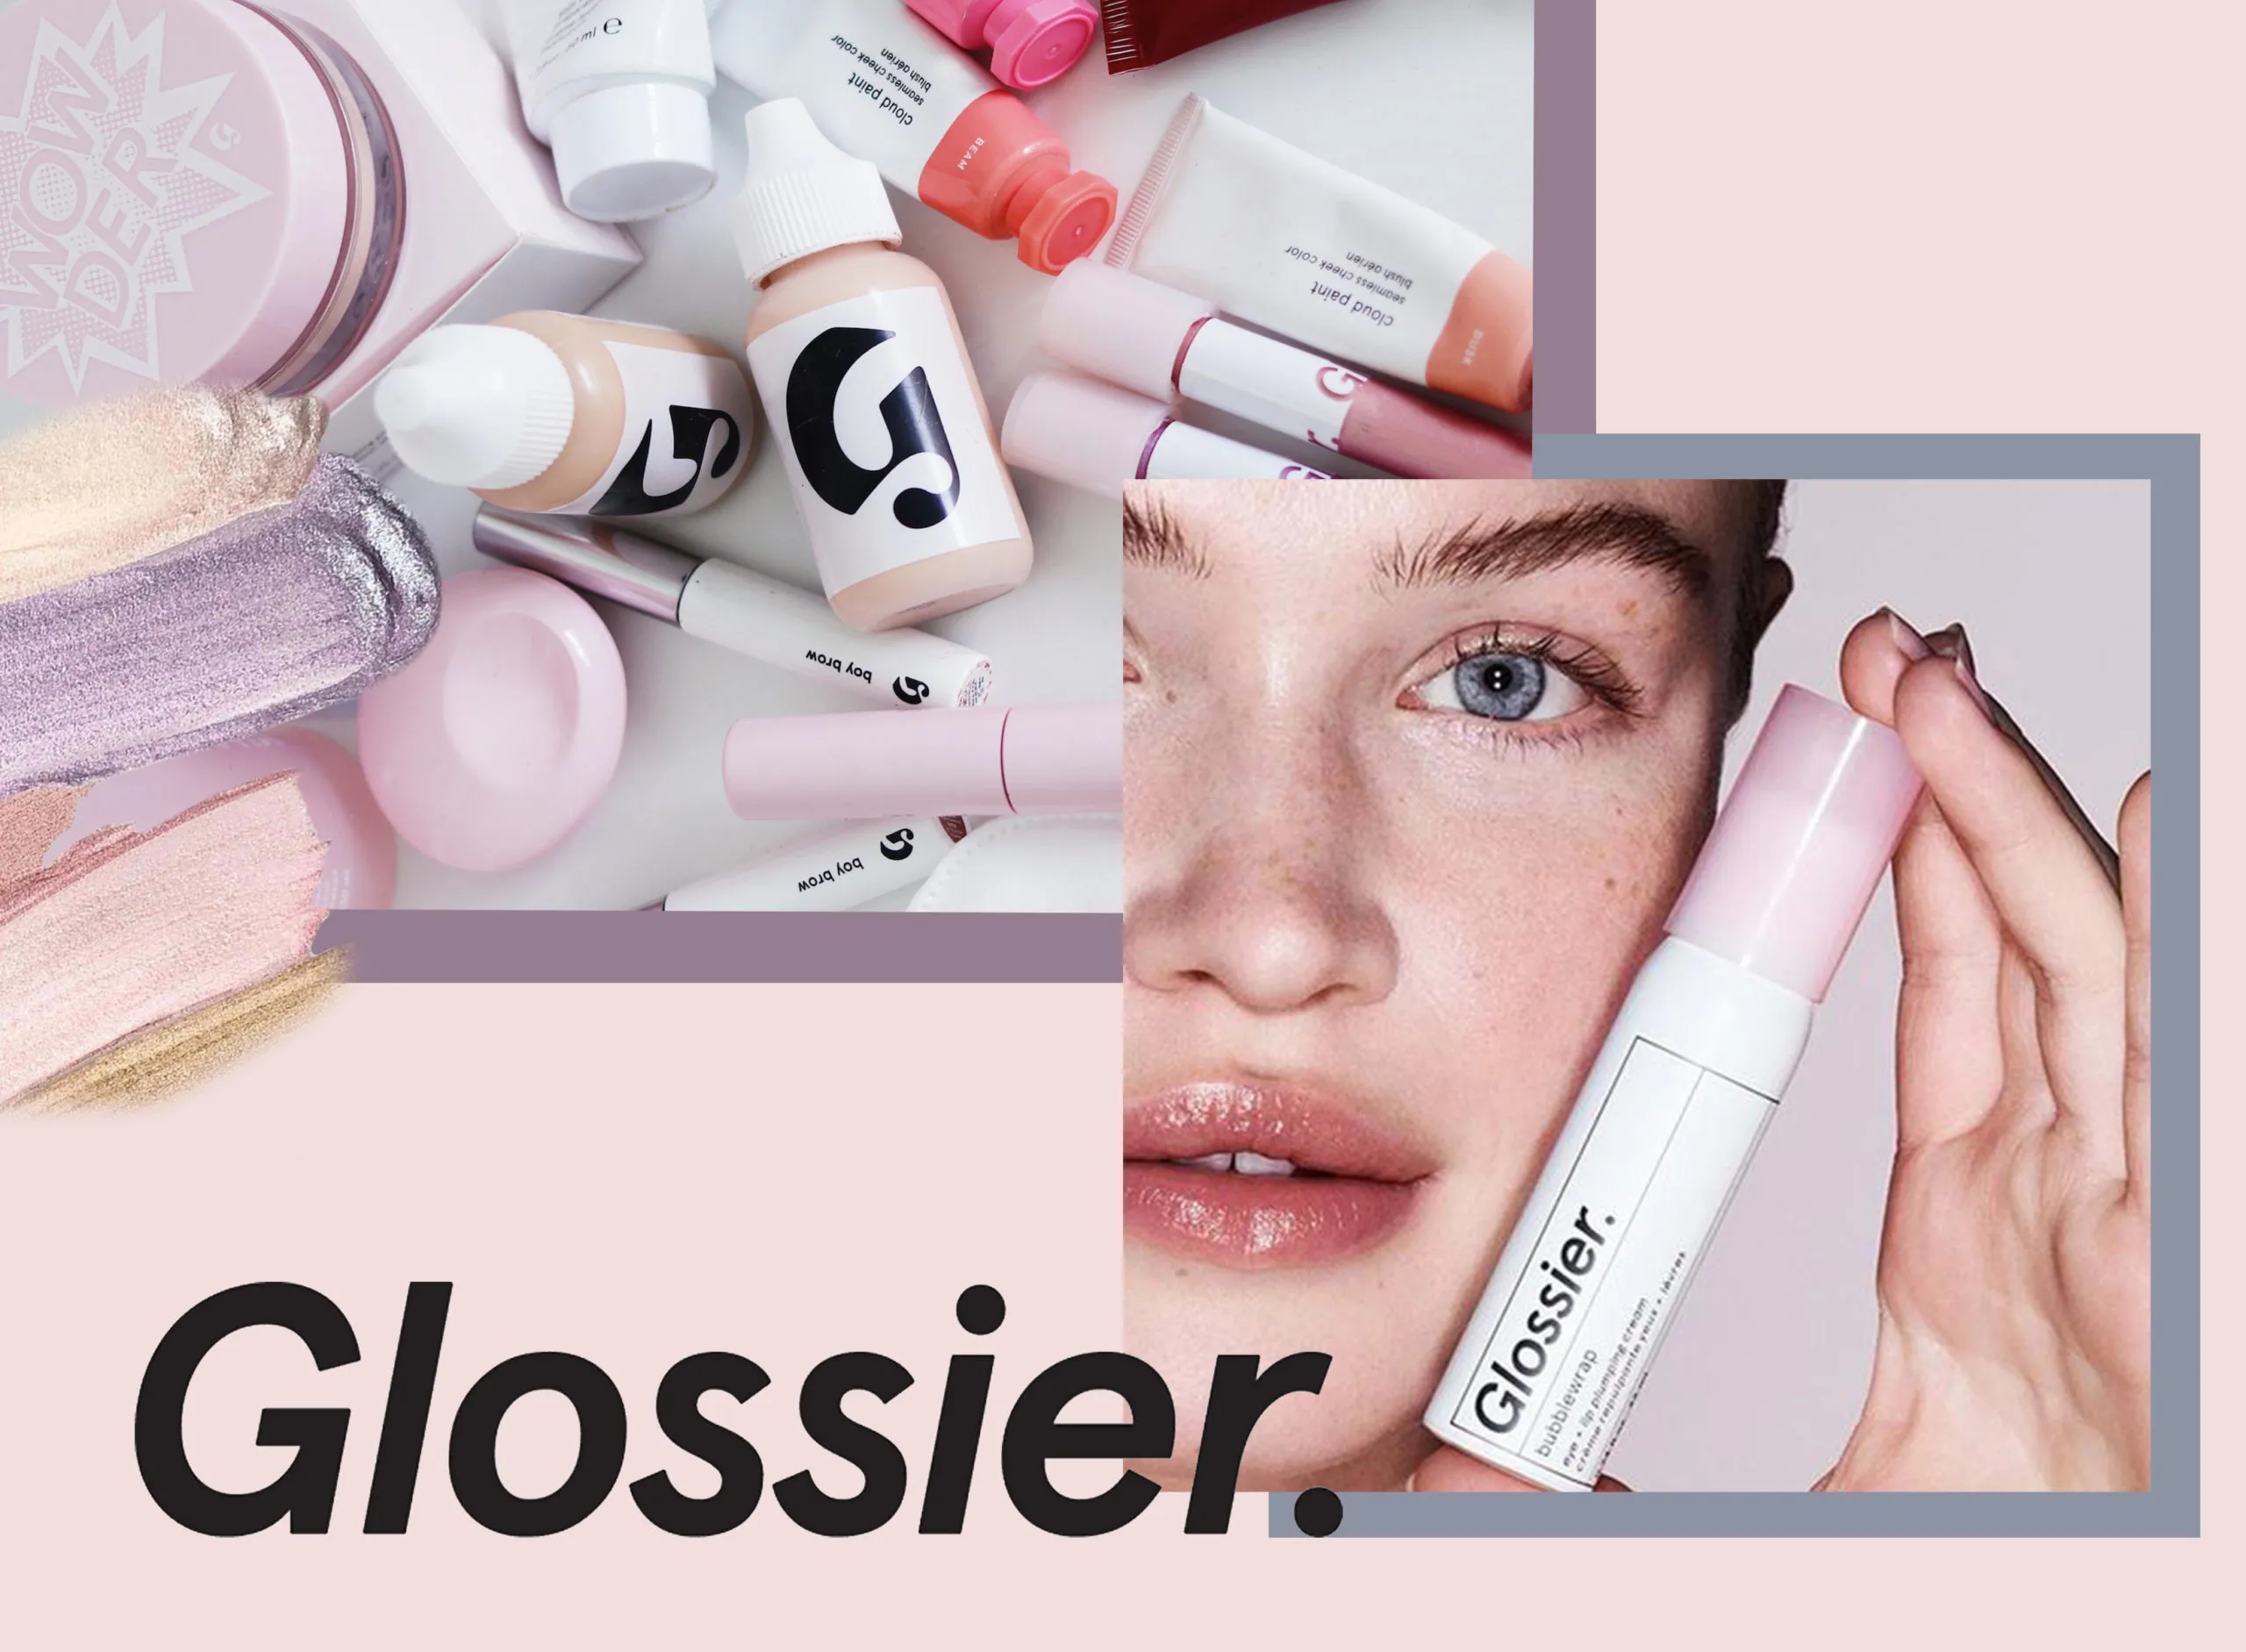 Our Honest Reviews of Glossier Products: Insights from Tried and Tested